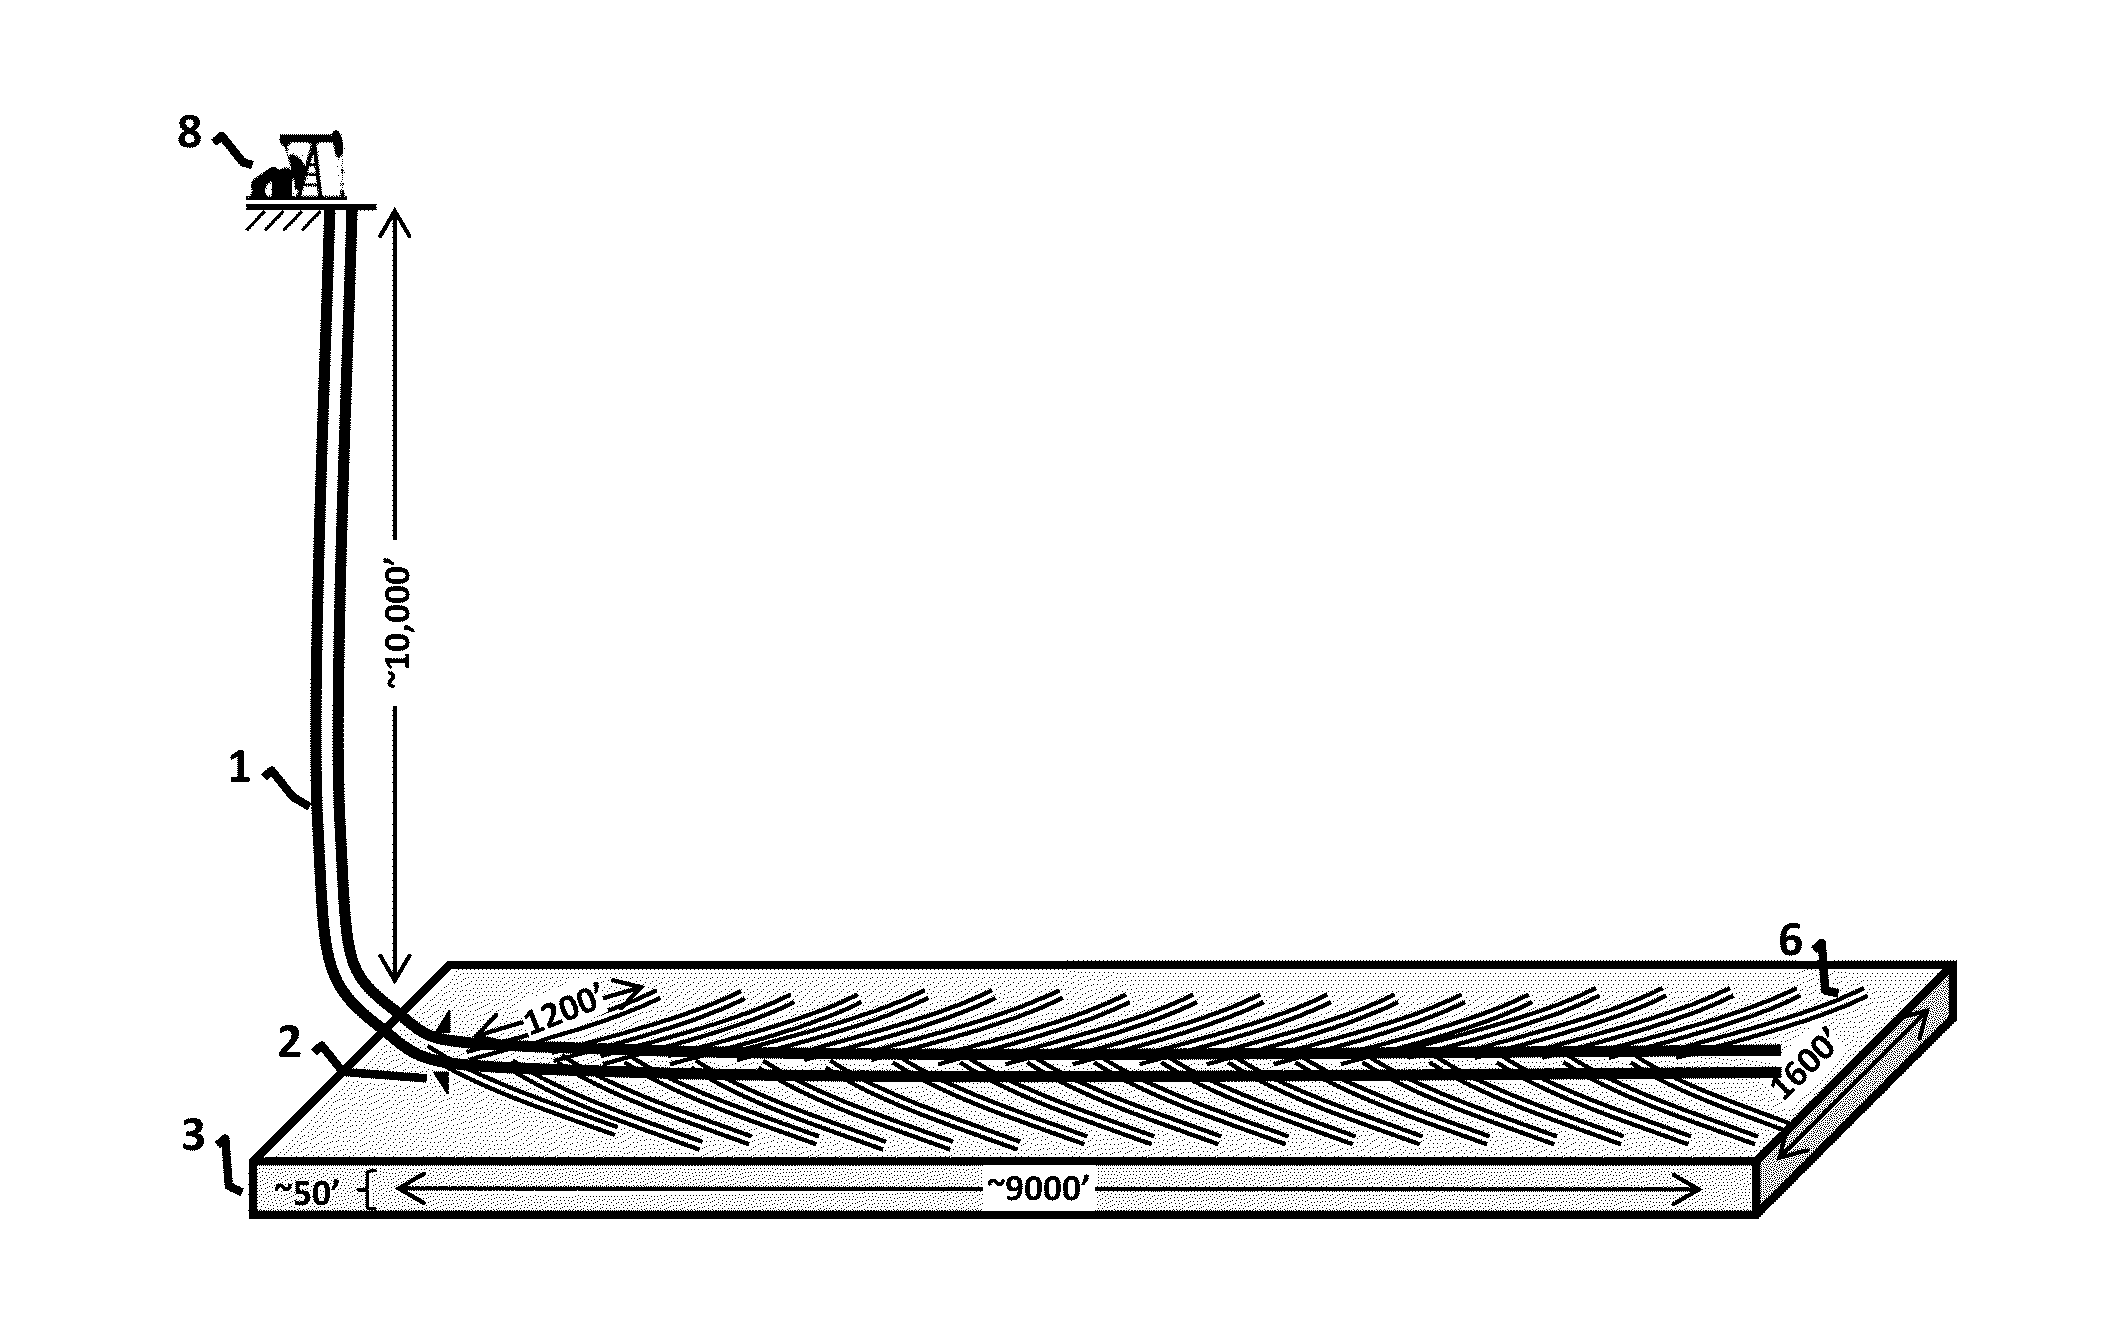 System for developing high pressure shale or tight rock formations using a profusion of open hole sinusoidal laterals